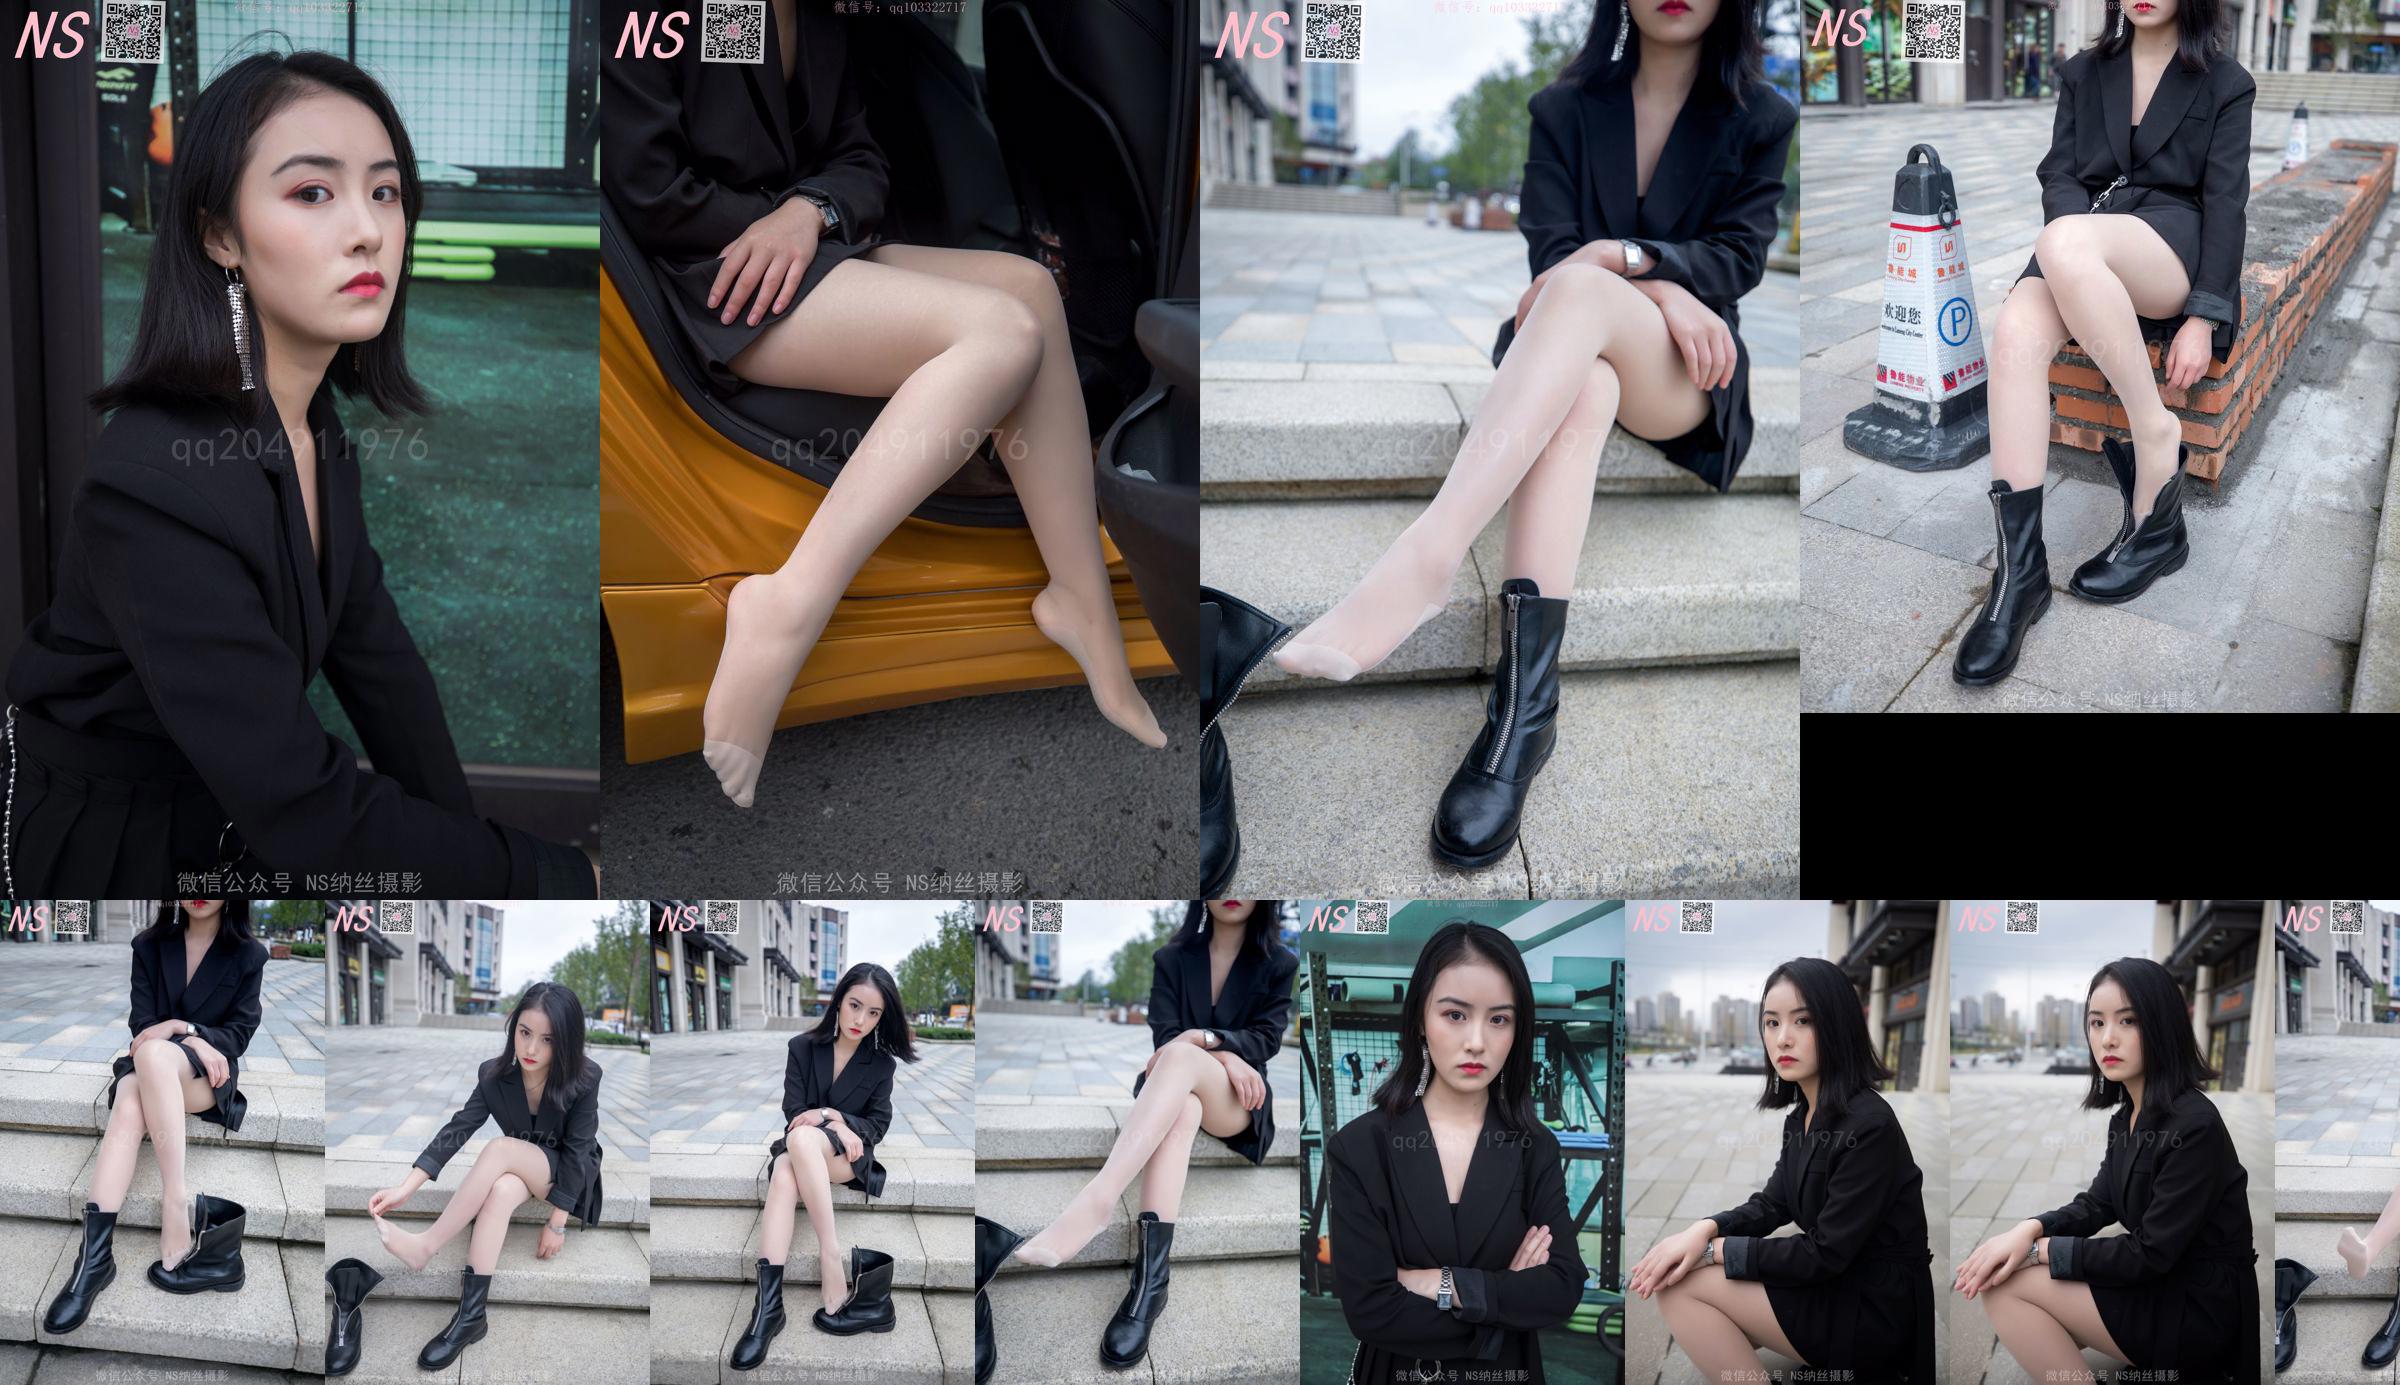 Yishuang "Special Wonderful Boots and Bas" [Nass Photography] No.70b03f Page 19